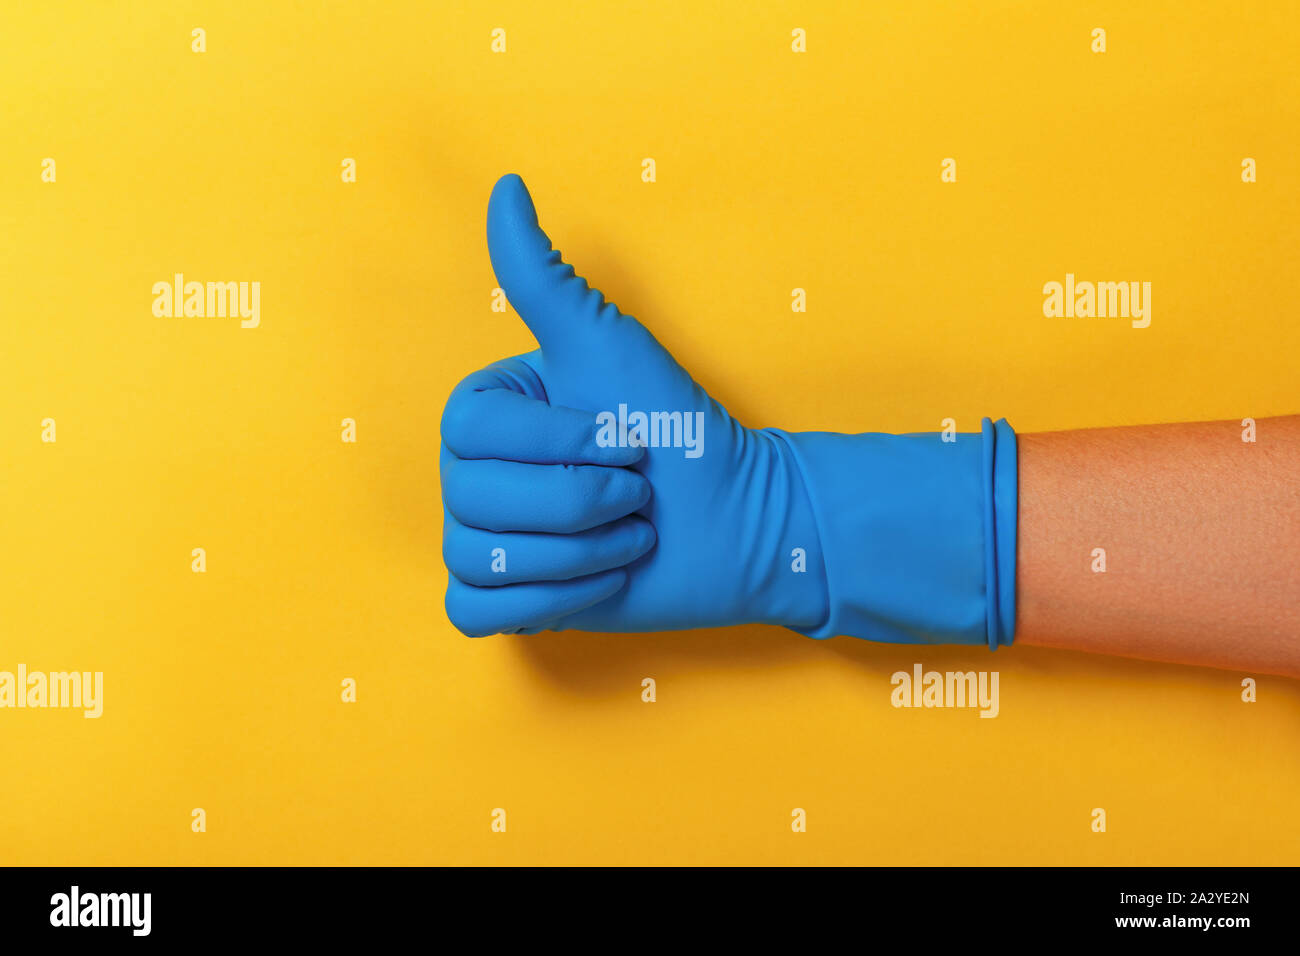 Thumb up in a blue protective glove on a yellow background. Stock Photo